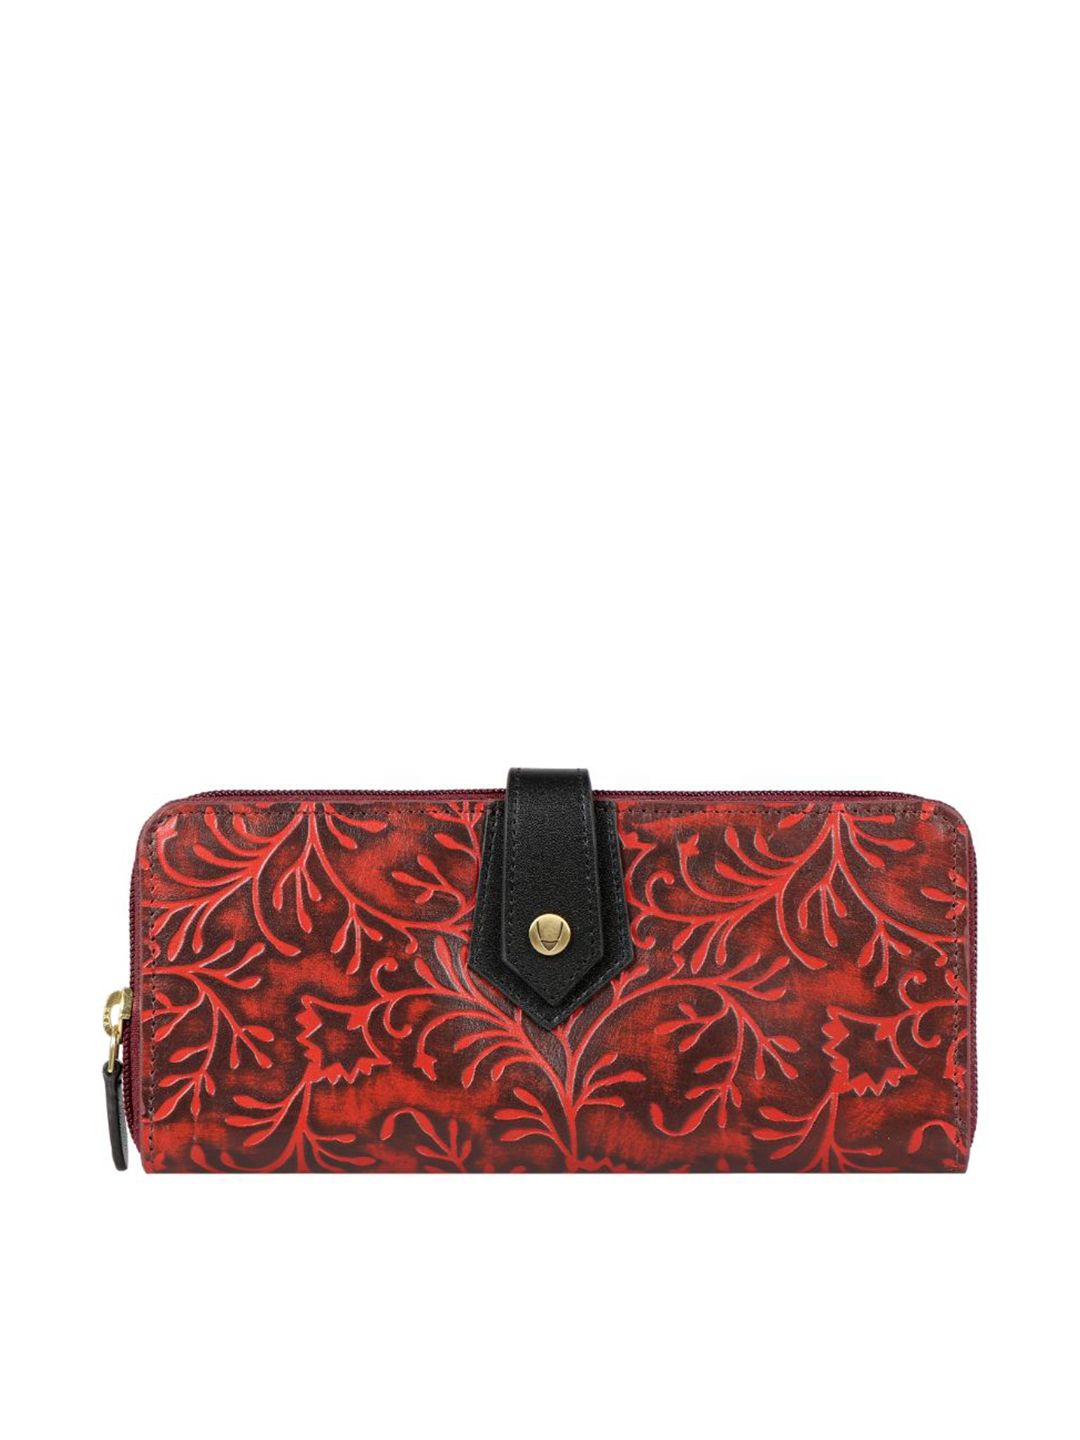 Hidesign Women Red & Black Printed Leather Zip Around Wallet Price in India